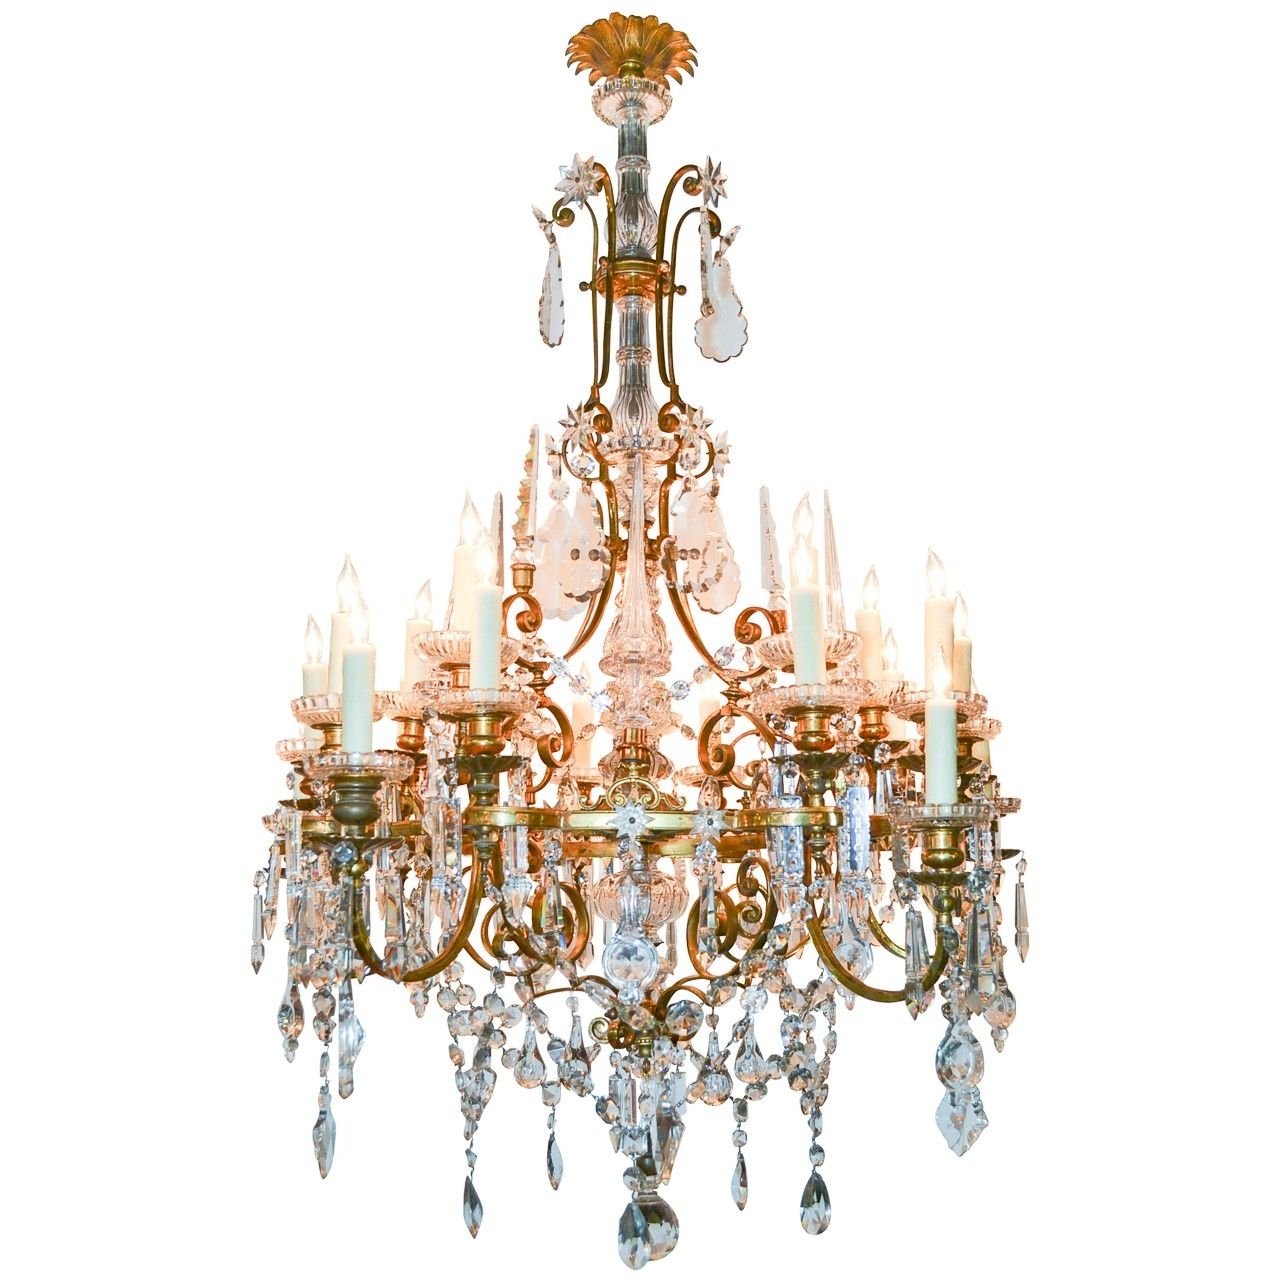 French Antiques Legacy Antiques Dallas Antiques Antique With Regard To French Crystal Chandeliers (View 12 of 15)